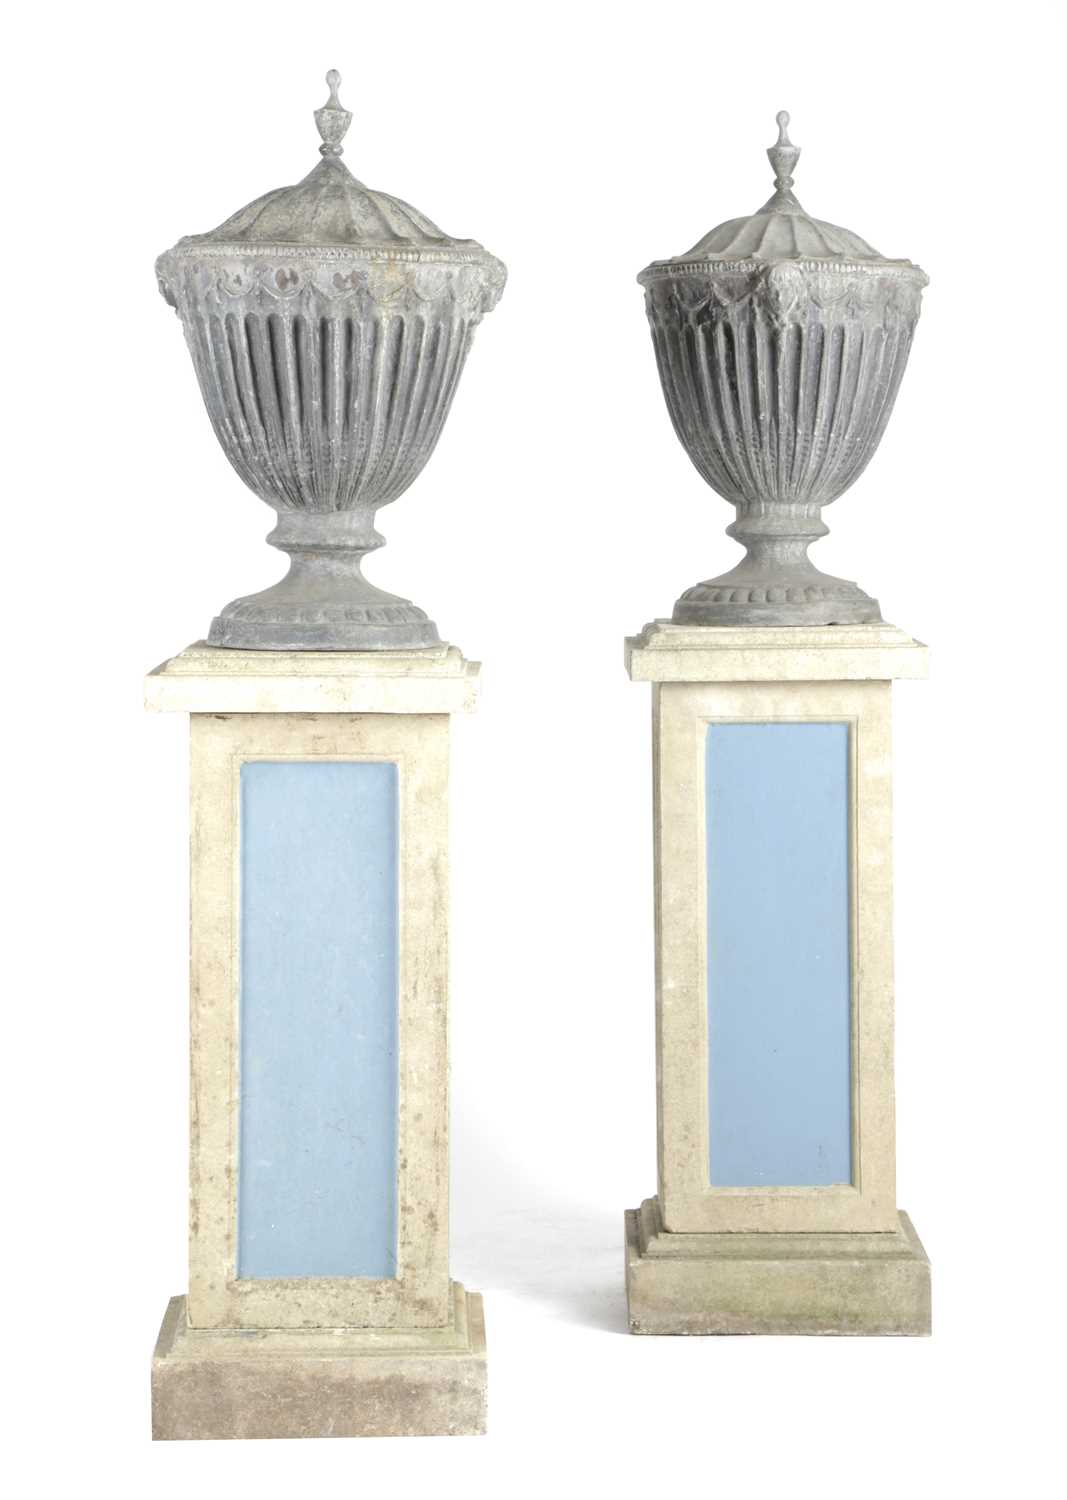 A PAIR OF BULBECK FOUNDRY LEAD GARDEN FINIAL URNS IN ADAM STYLE, 20TH CENTURY of fluted form with - Image 2 of 2